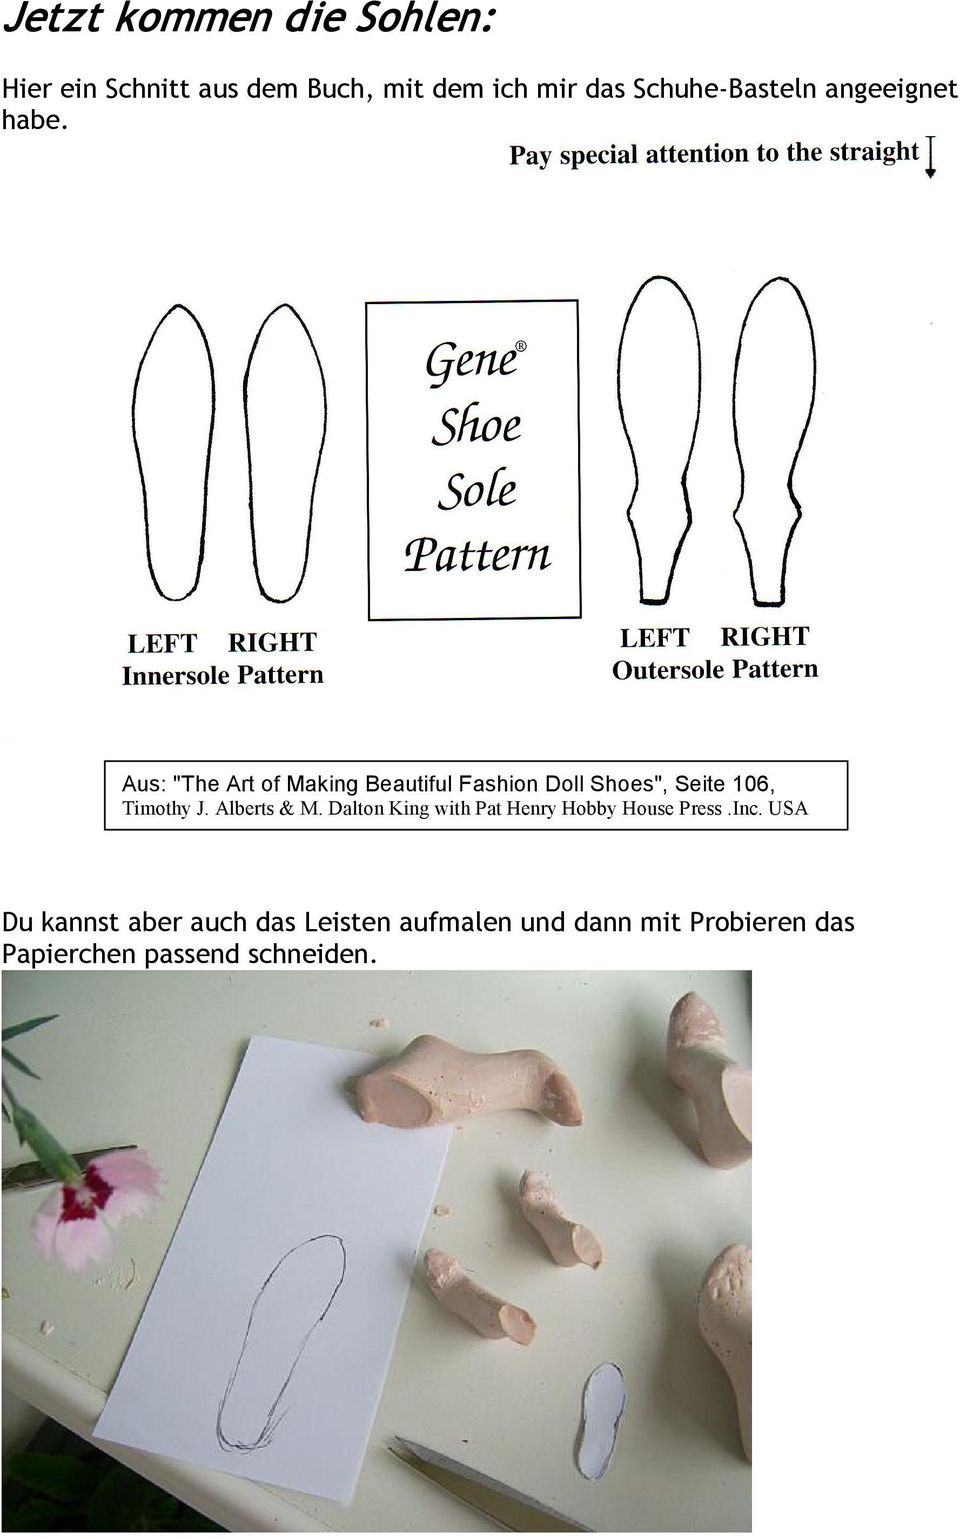 Aus: "The Art of Making Beautiful Fashion Doll Shoes", Seite 106, Timothy J.